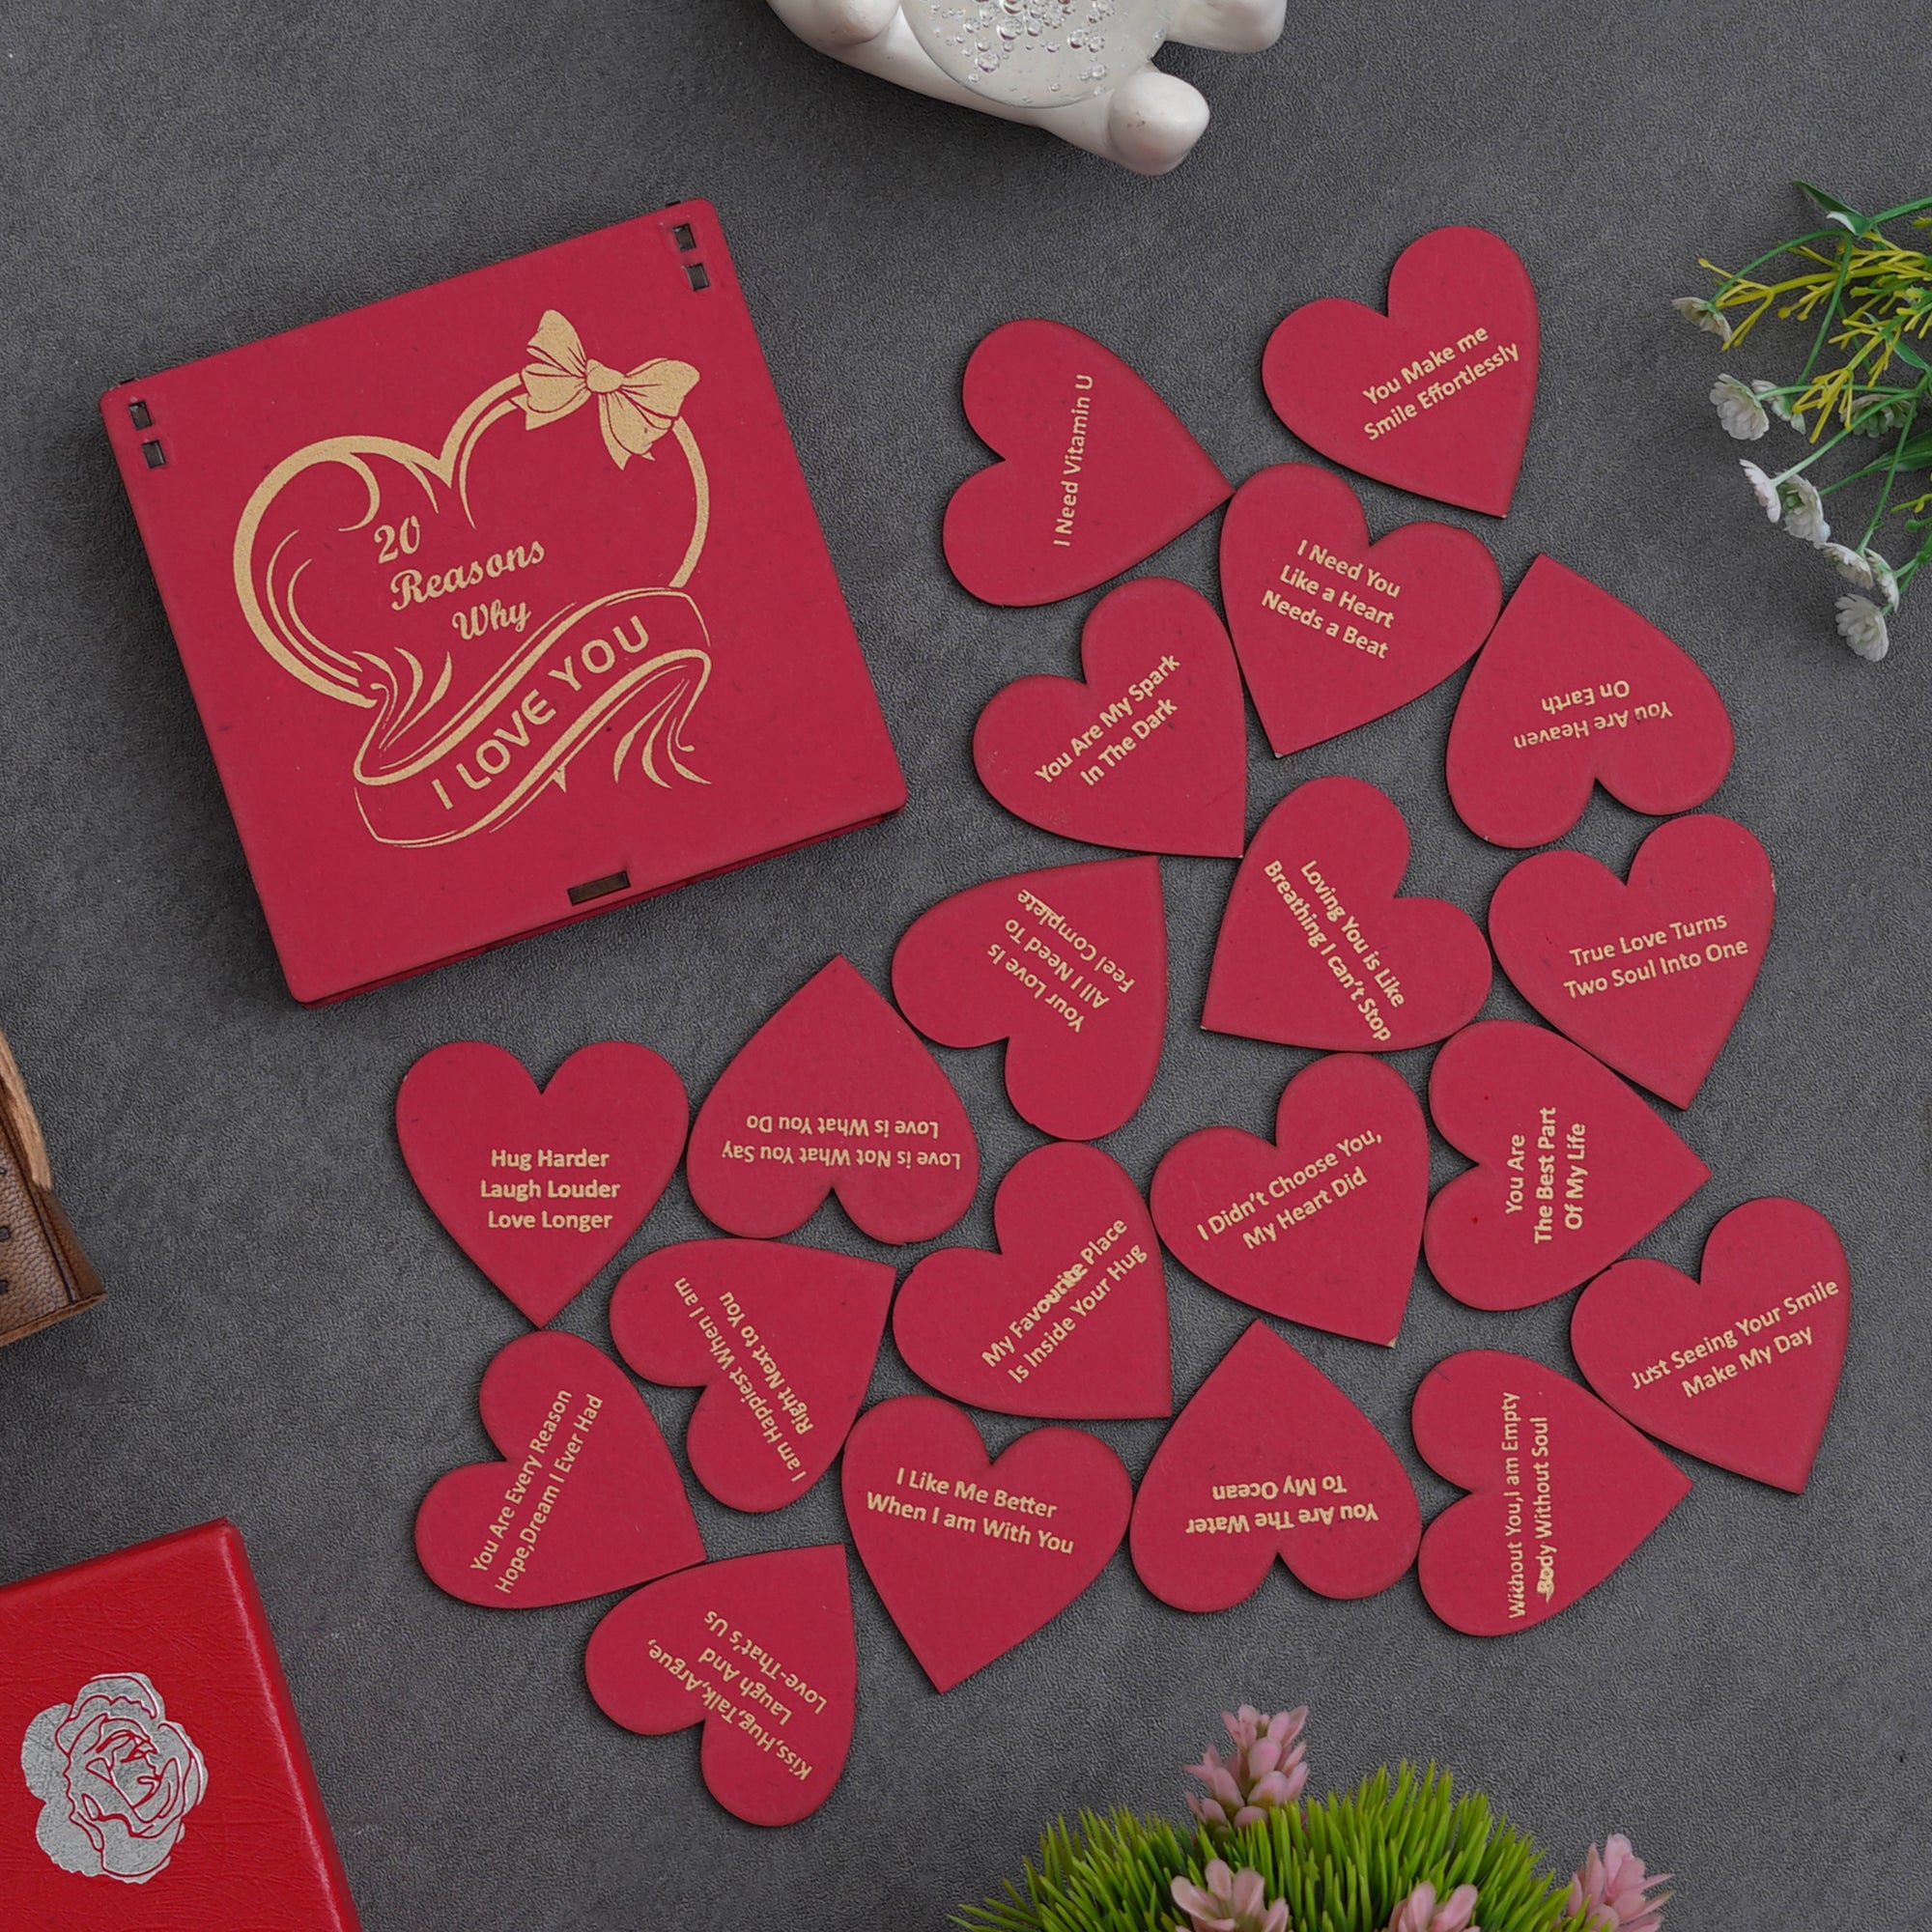 Valentine Combo of Golden Red Rose Gift Set, "20 Reasons Why I Love You" Printed on Little Red Hearts Decorative Wooden Gift Set Box 3